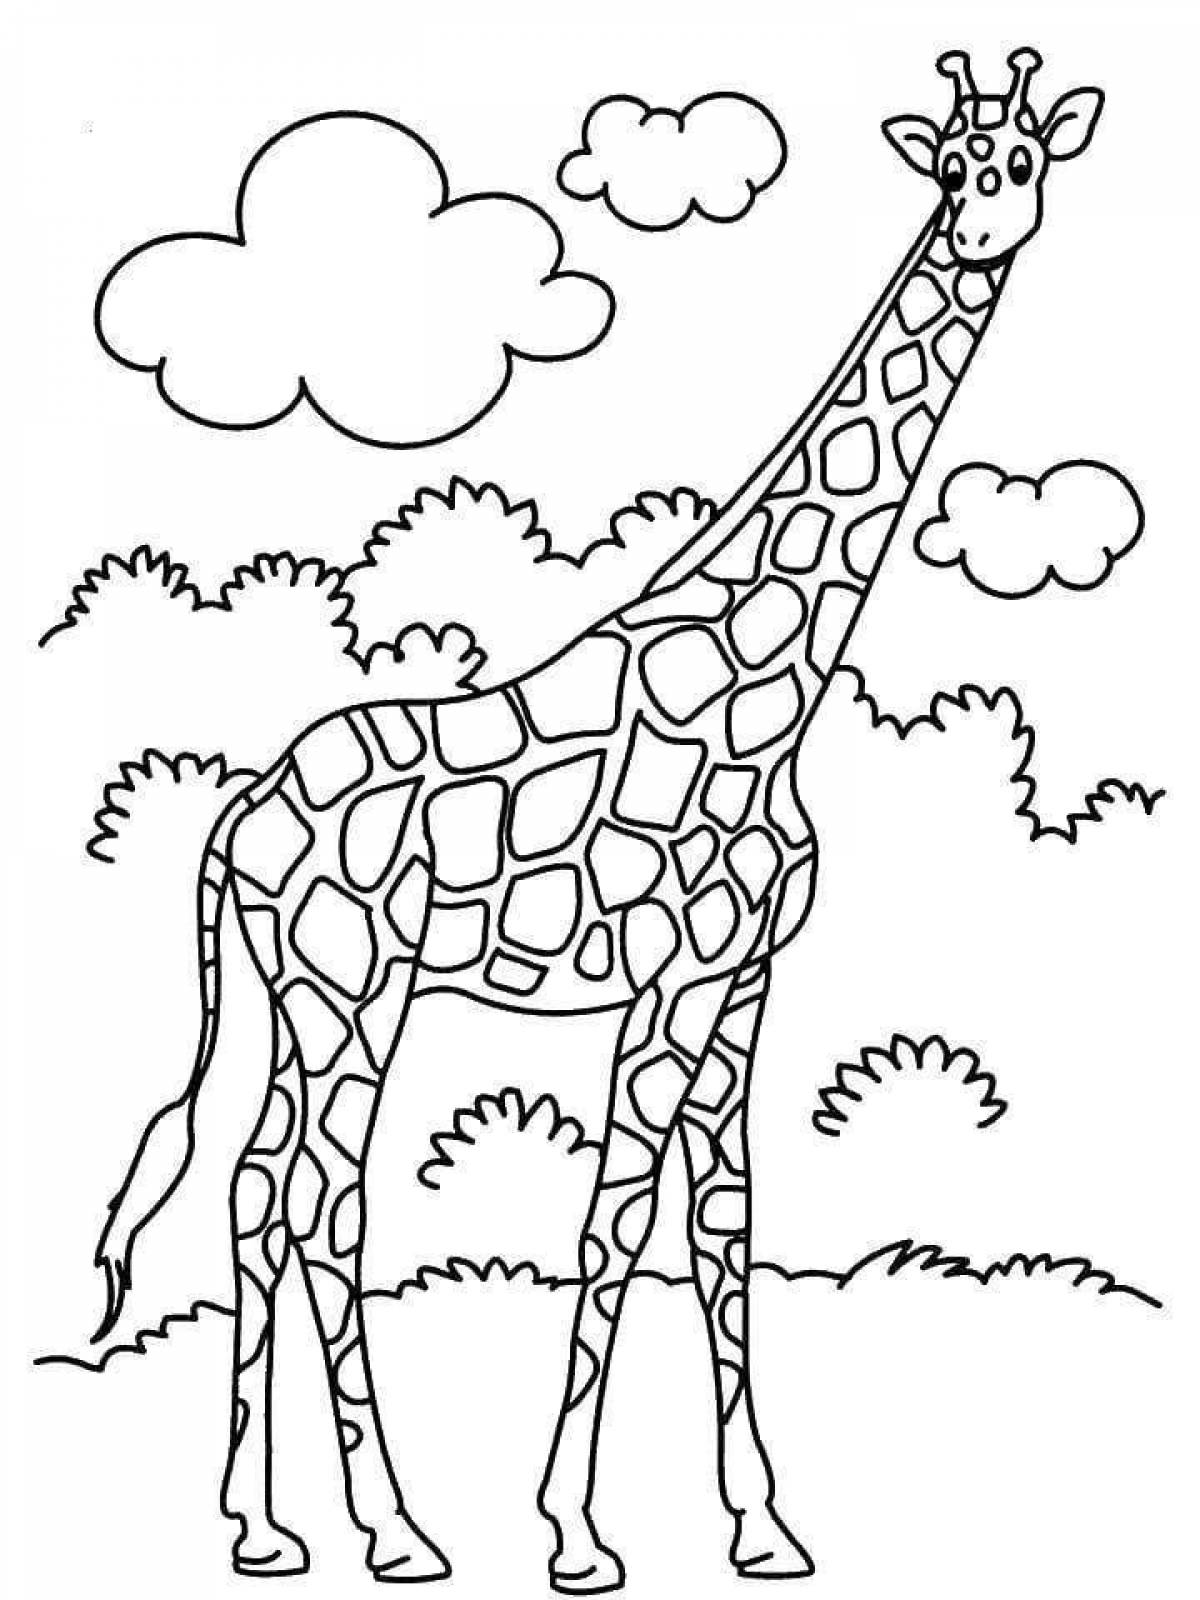 Outstanding giraffe coloring book for 3-4 year olds